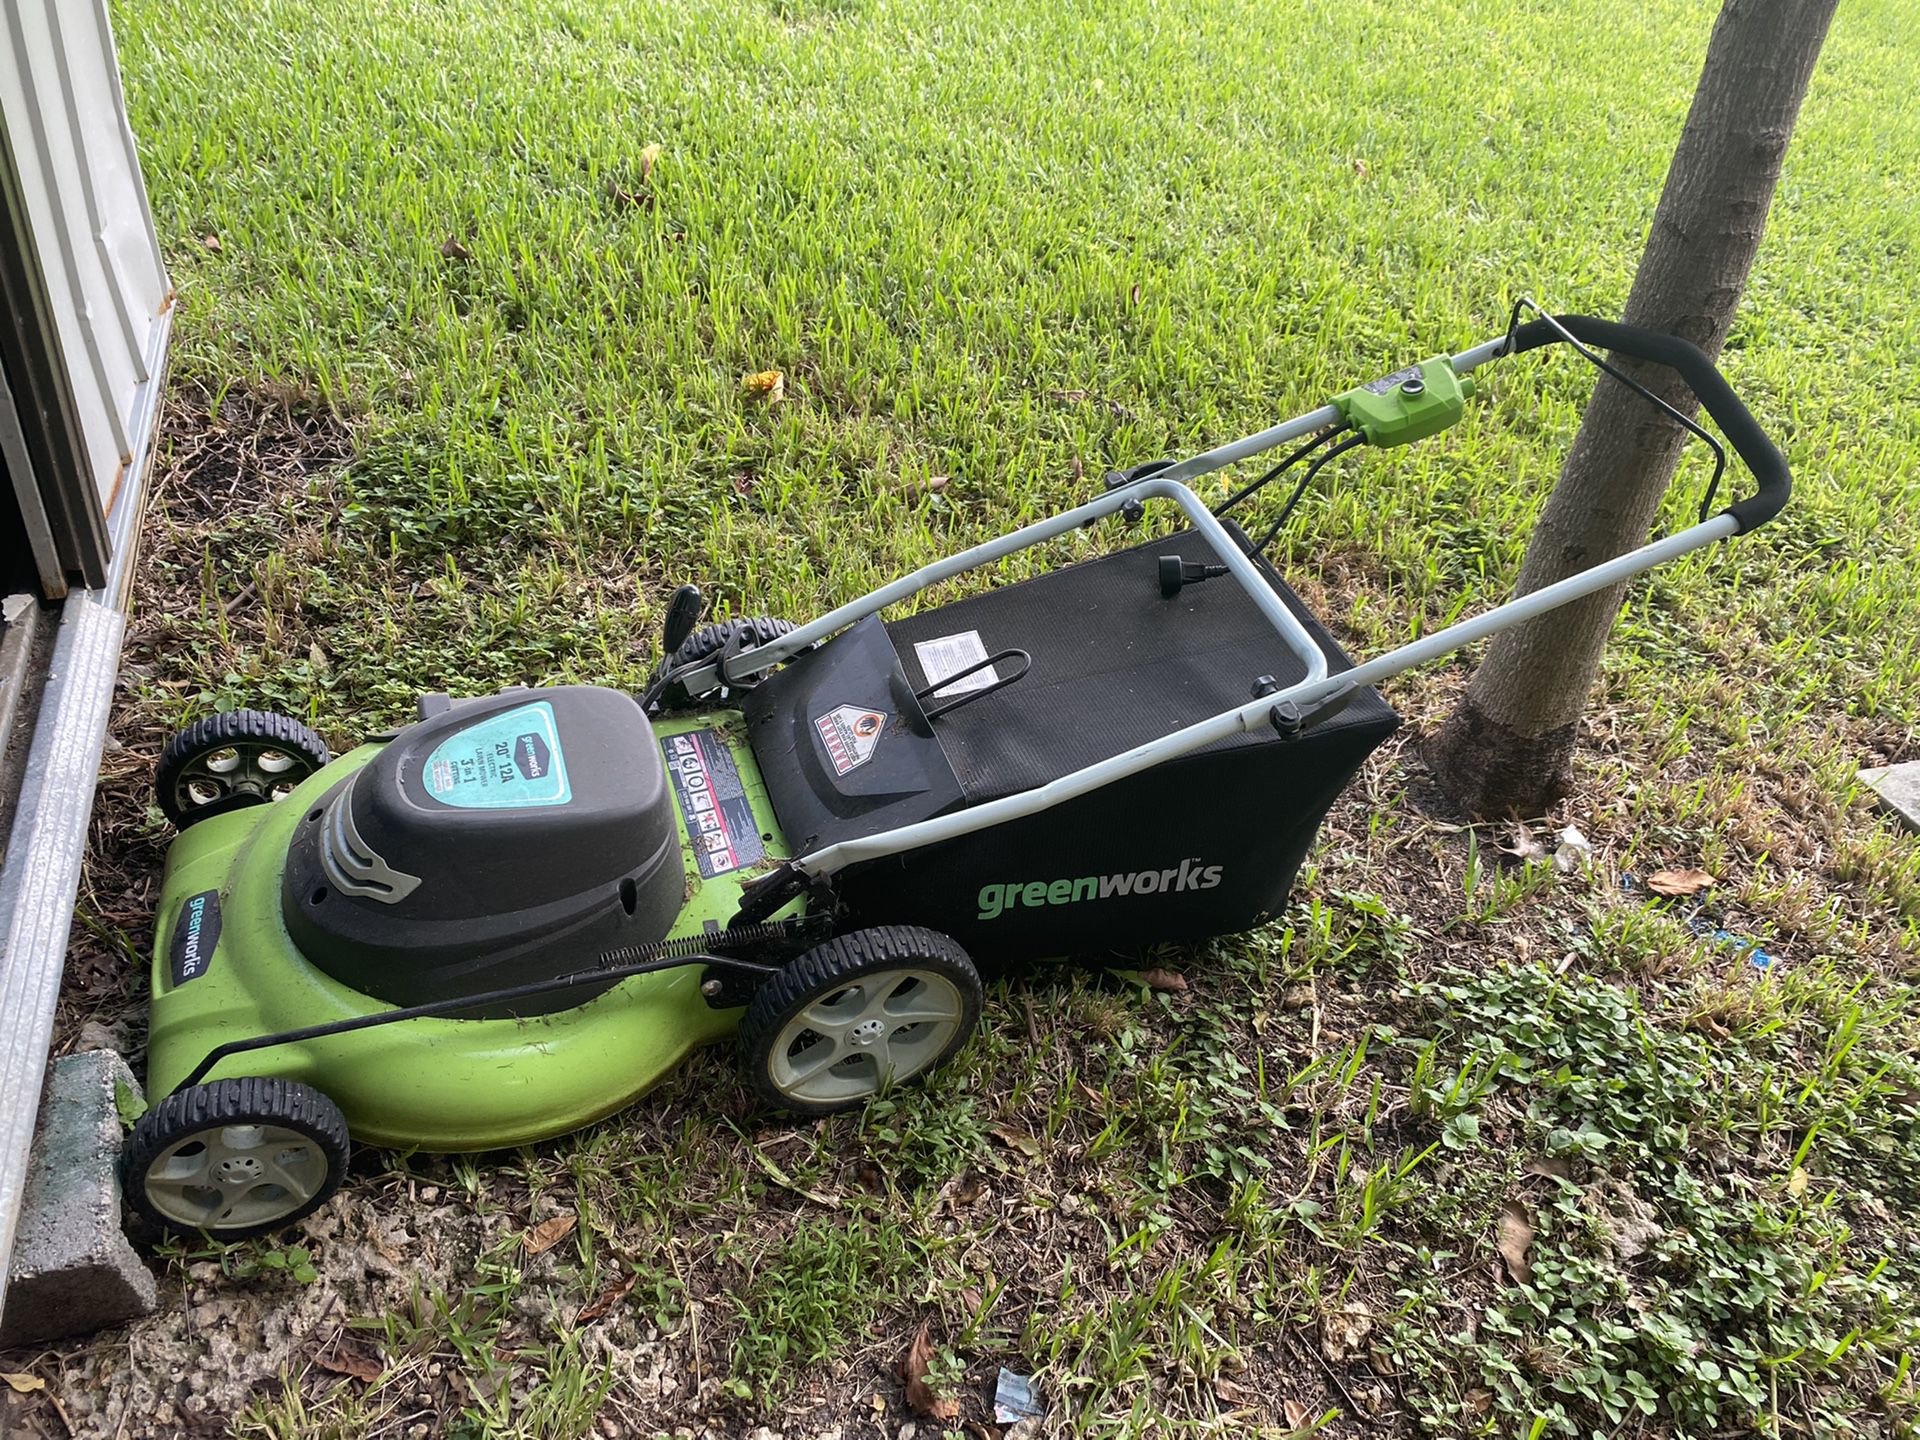 Greenworks electric corded lawn mower